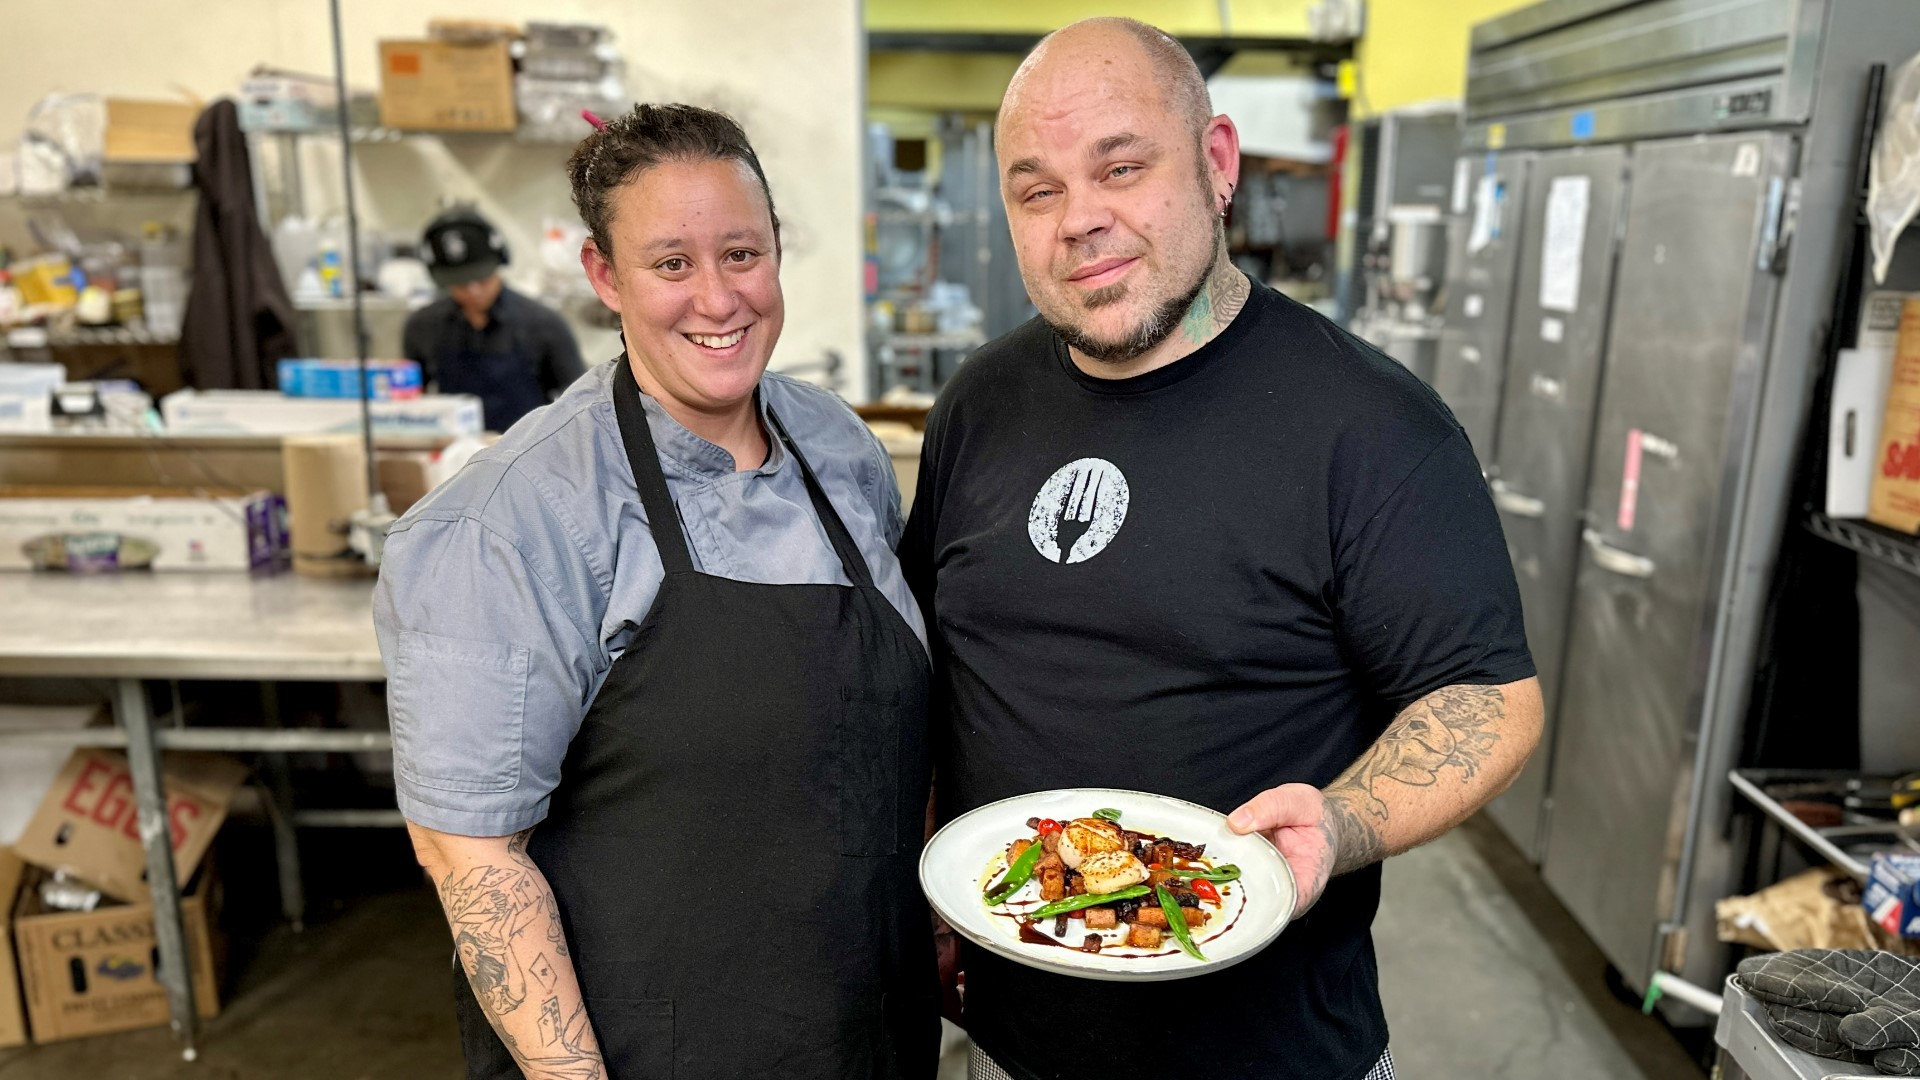 Paul and Stephanie Staley of CHOMP! Foods catering renovated The Canal, where they host events, pop-ups and a weekly market for small businesses. #k5evening